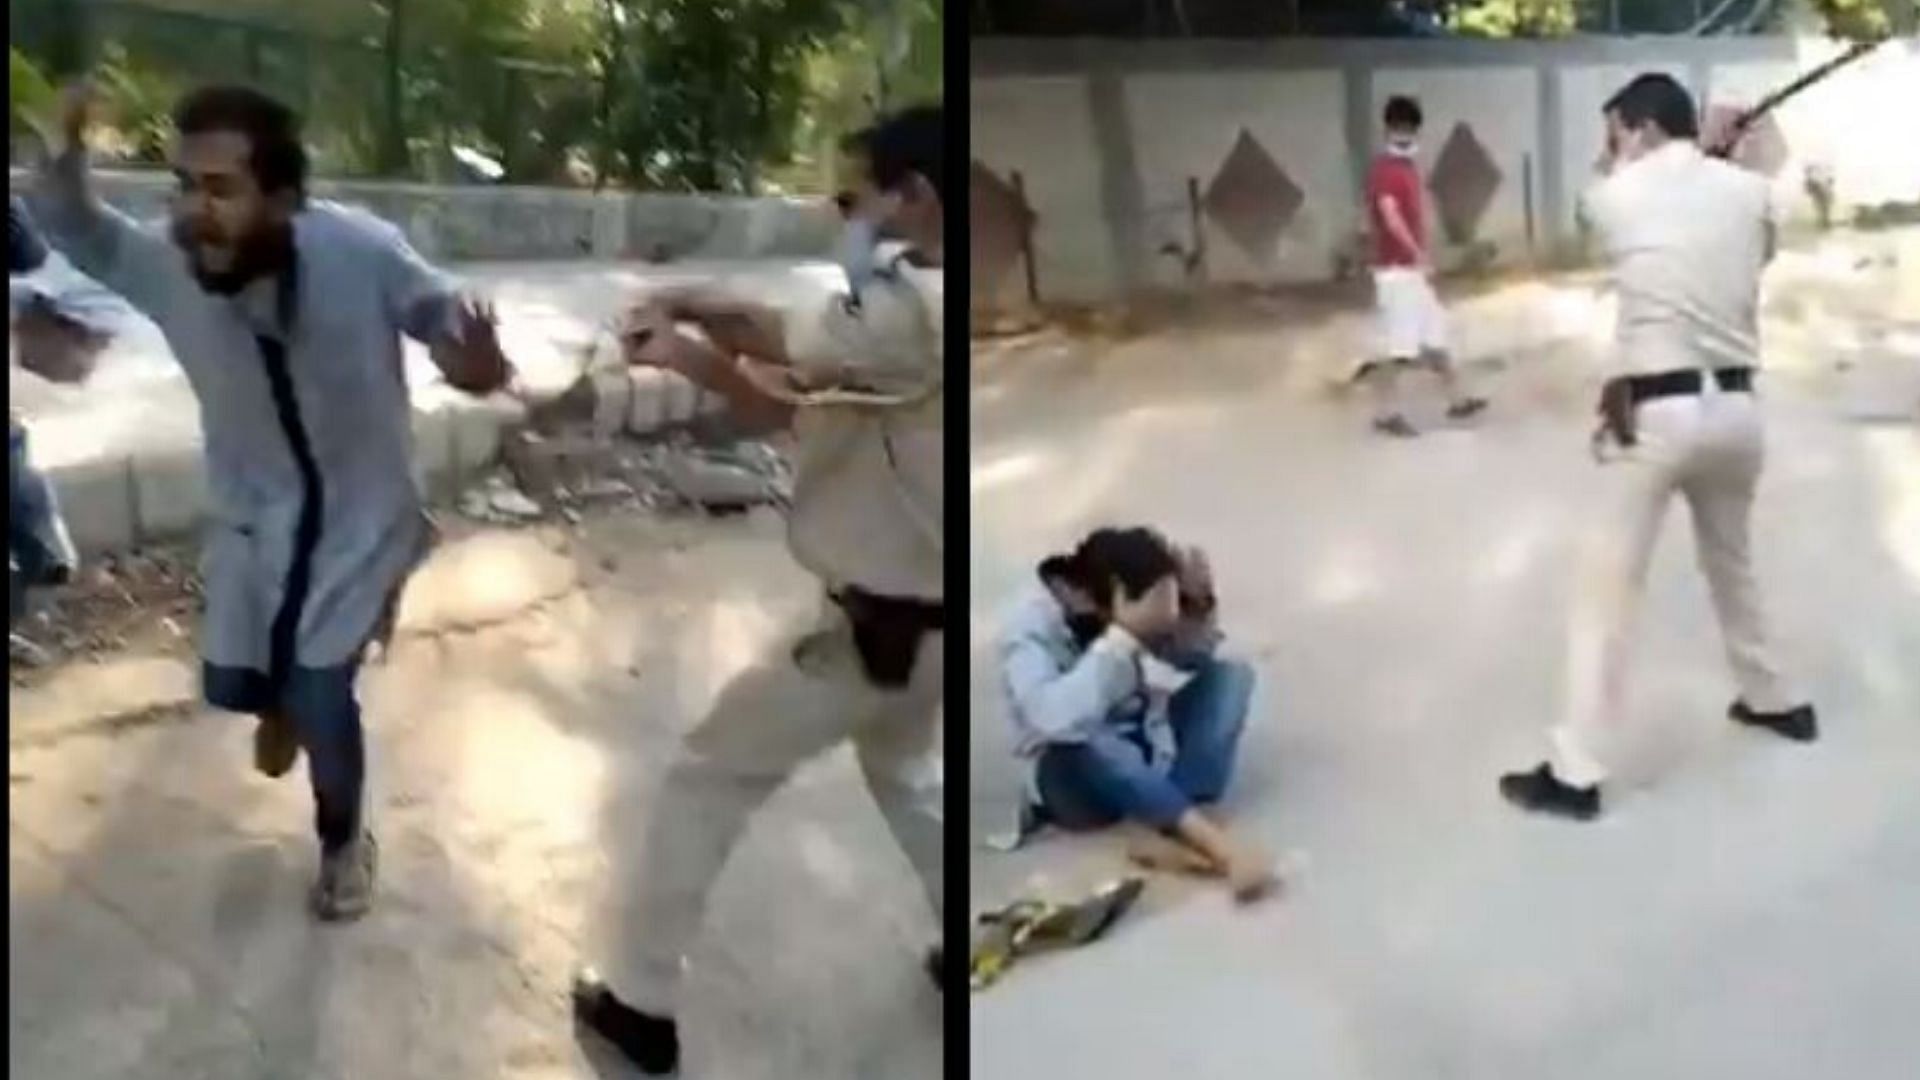 A 30-year-old man, identified as Imran, was allegedly thrashed by a policeman for ‘hugging people’ in southwest Delhi.